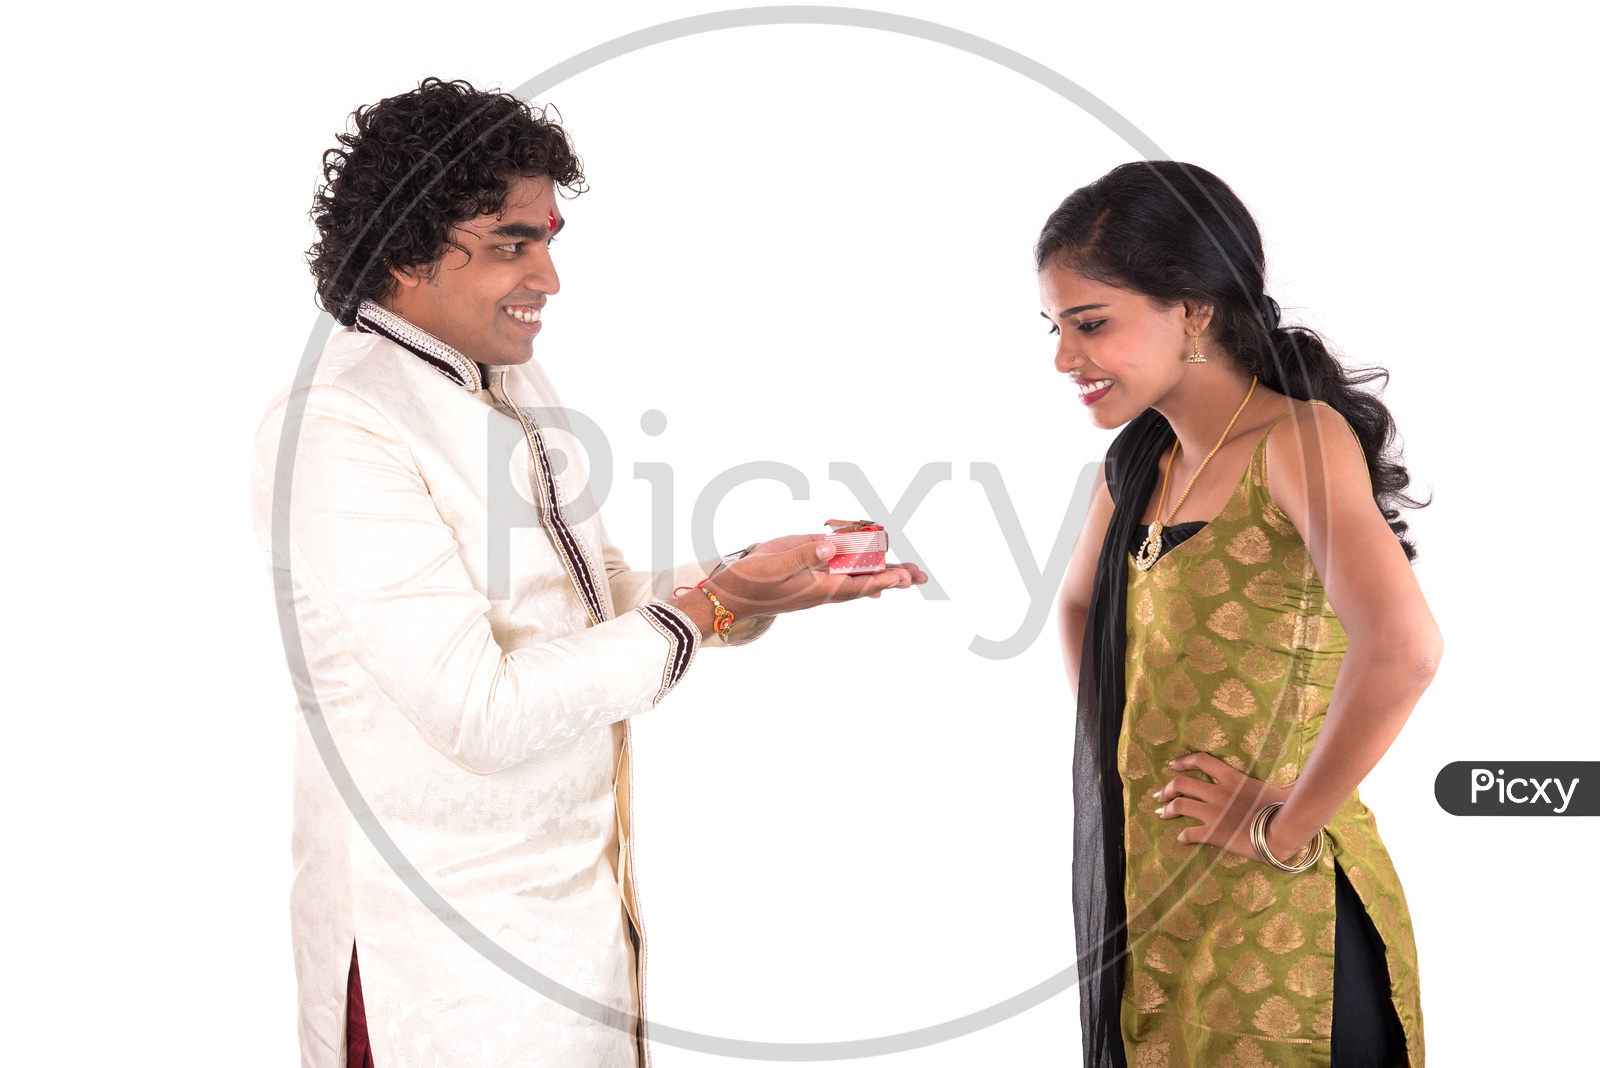 Brother Gifting His Sister With A Gift Box On The Occasion Of Rakhi Festival